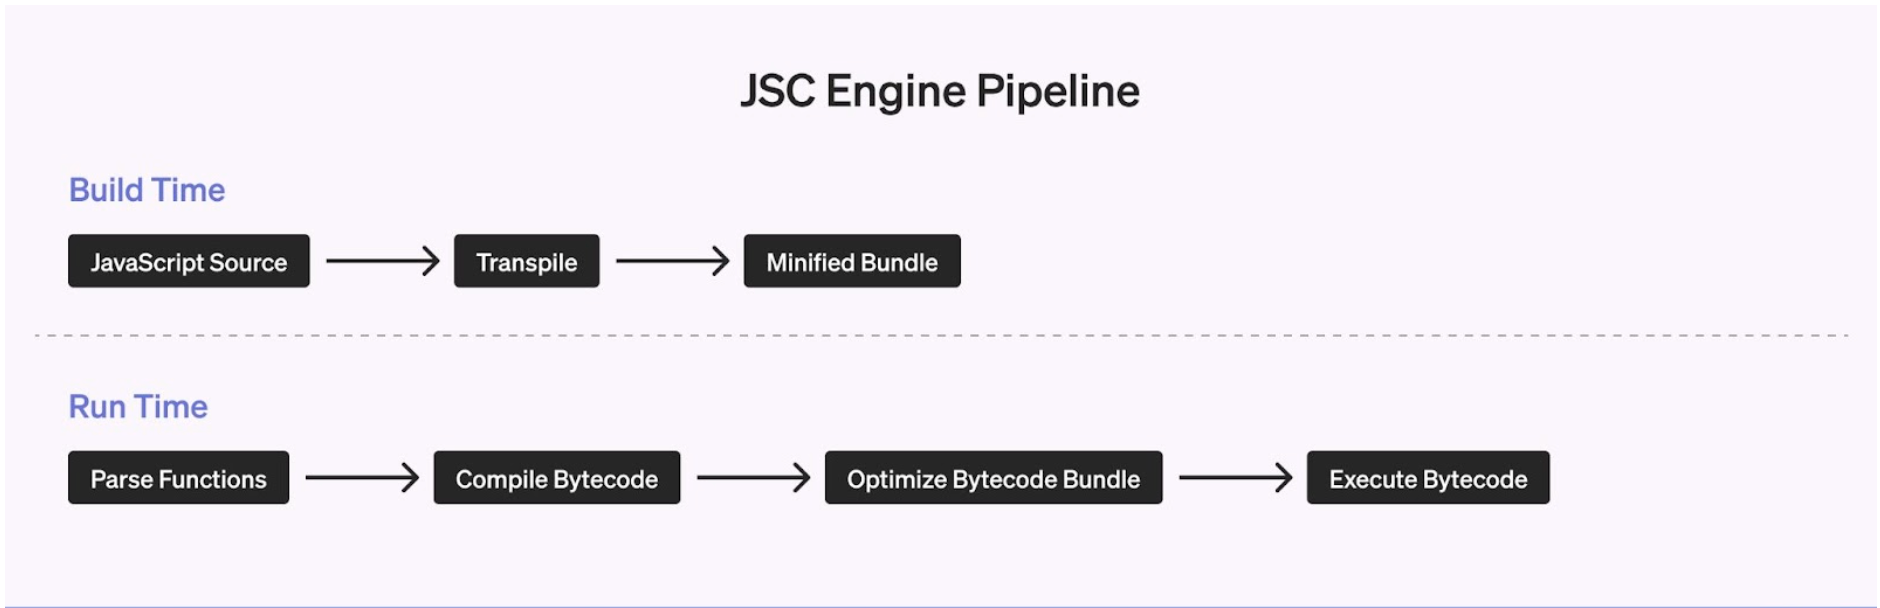 A dual flow chart titled "JSC Engine Pipeline" depicting a Build Time flow and Run Time flow